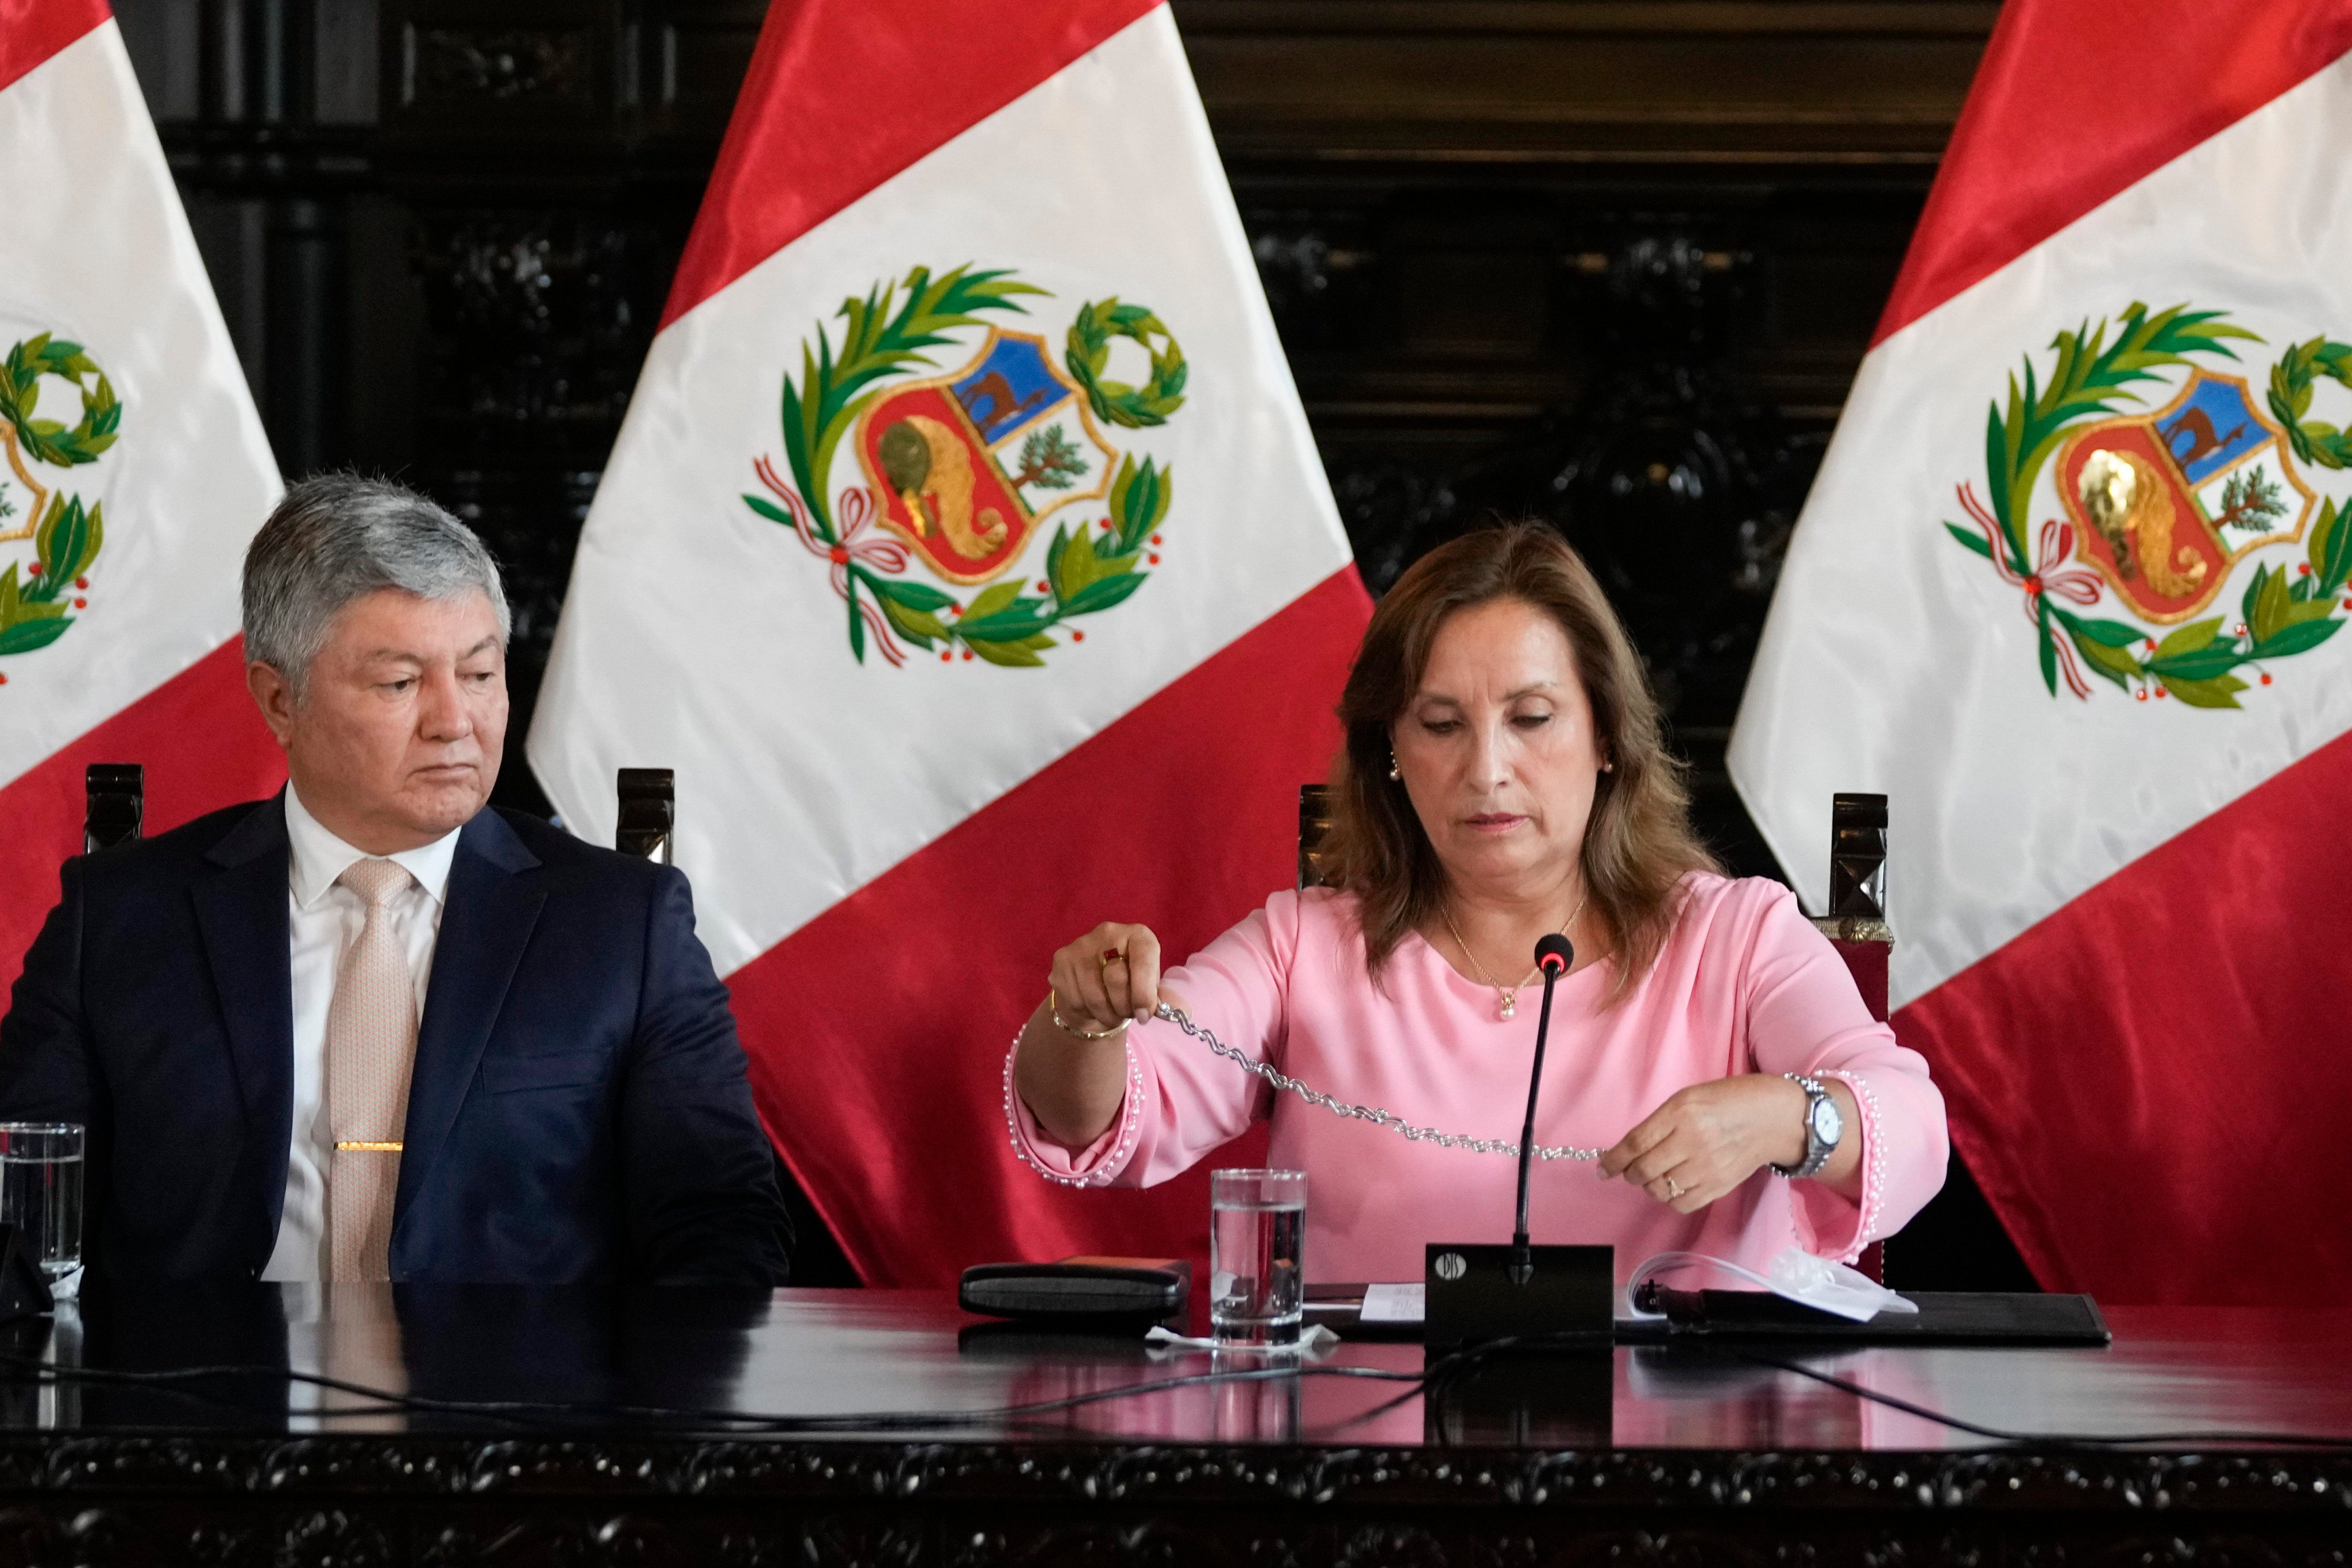 Peruvian President Dina Boluarte, accompanied by her lawyer Mateo Castaneda, shows her necklace to the media at the government palace in Lima in April amid an investigation into whether she illegally received cash, luxury watches and jewellery. Photo: AP